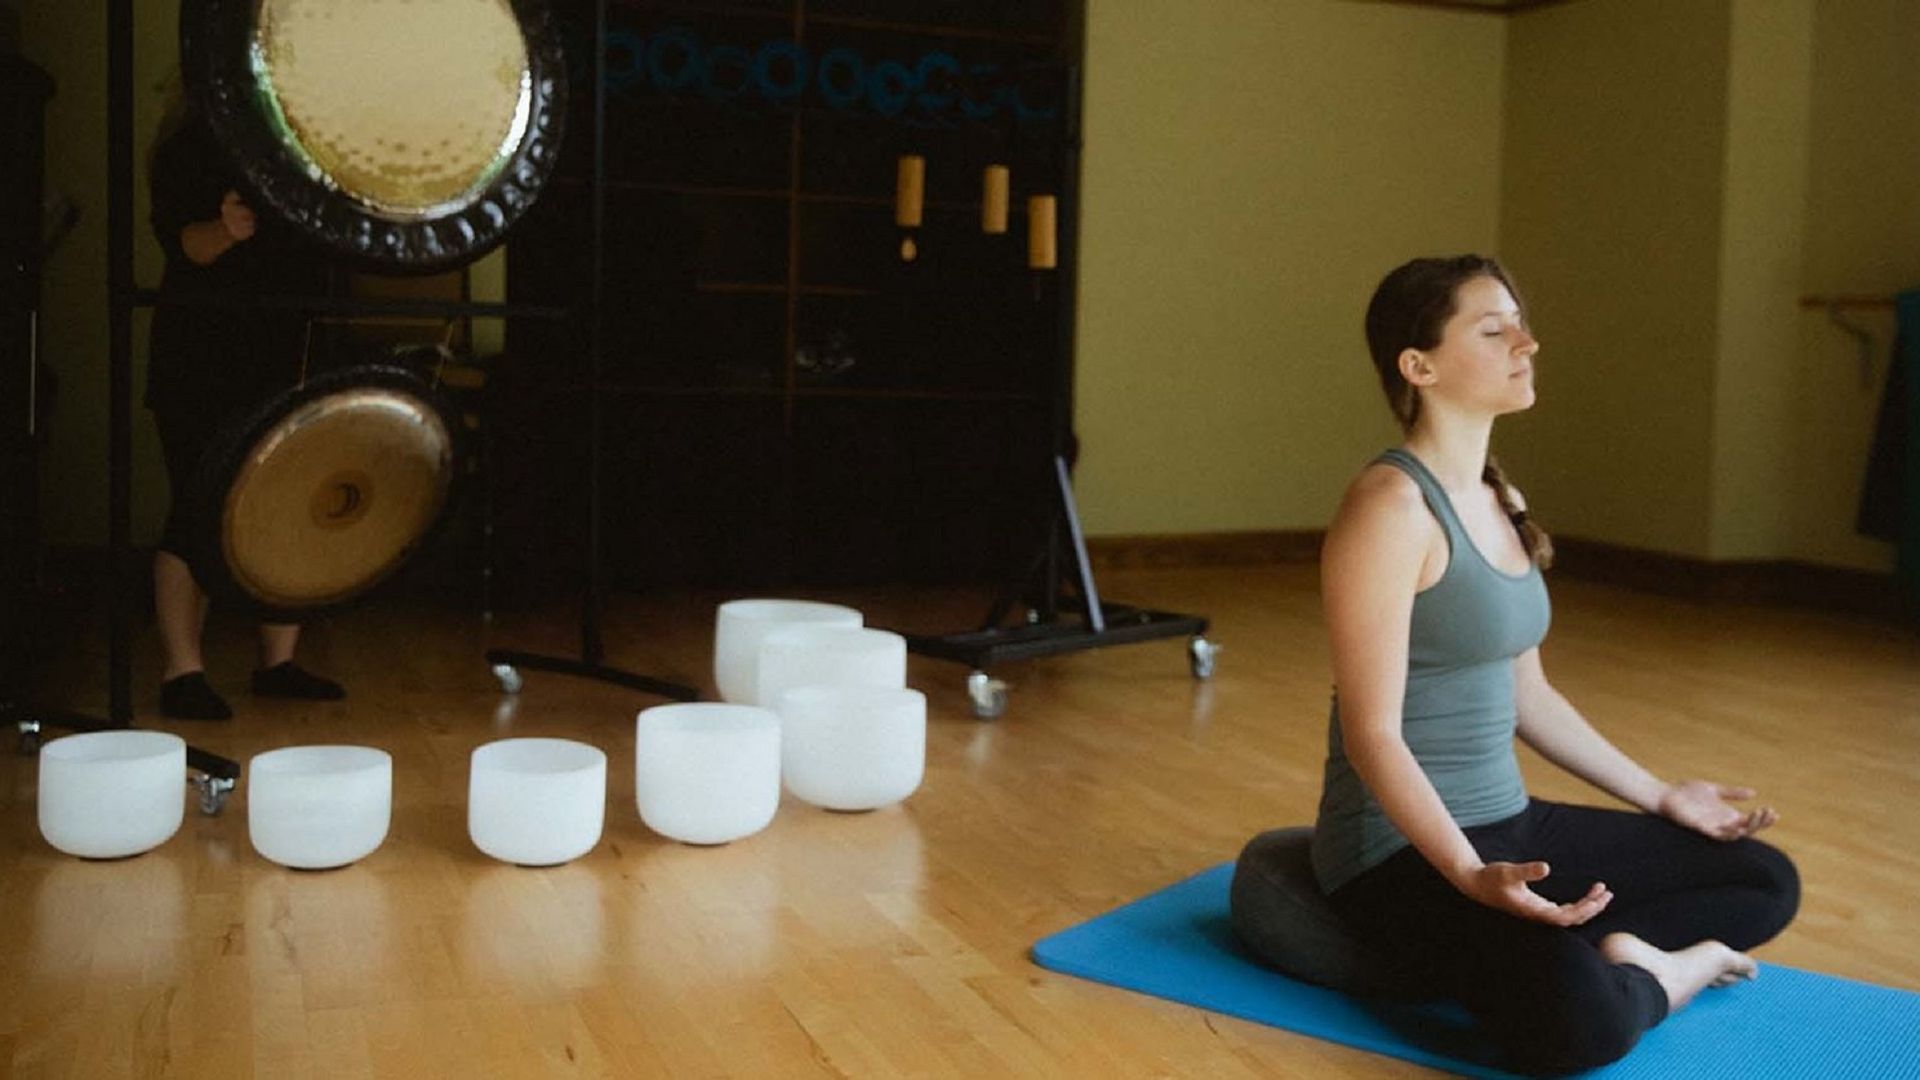 A woman meditation in front of crystal bowls and a gong